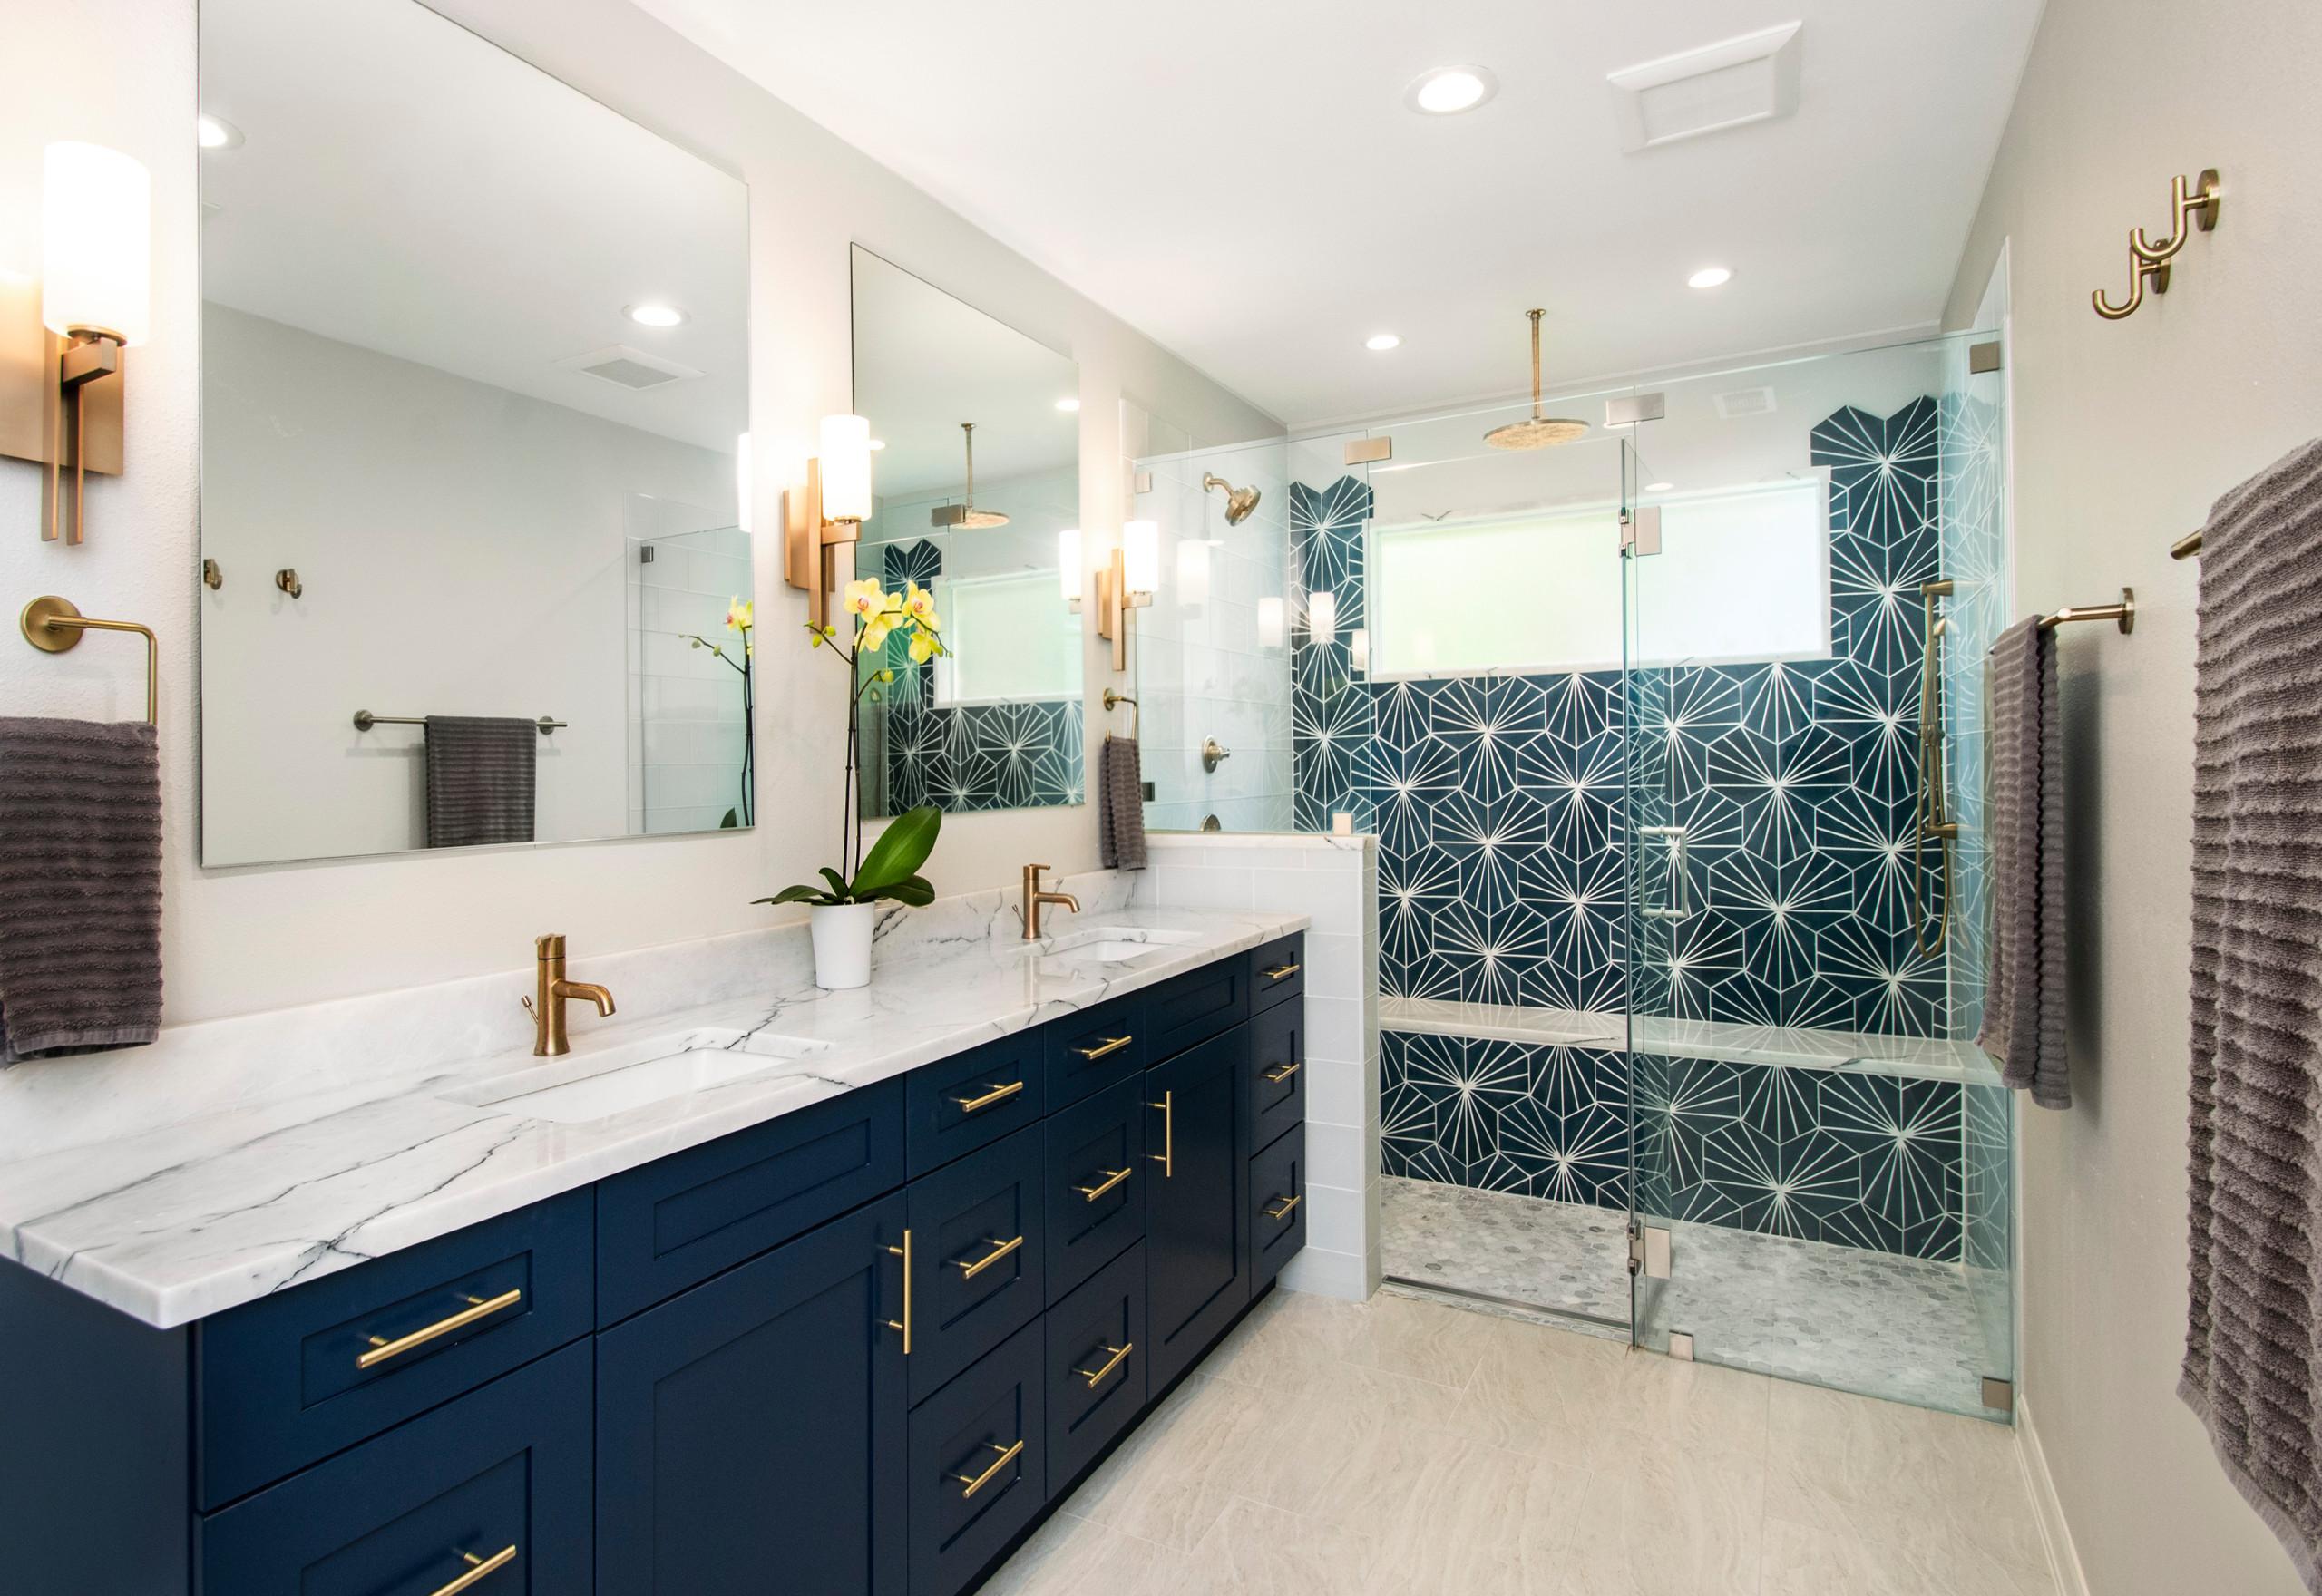 75 Beautiful Blue Tile Bathroom Pictures Ideas July 2020 Houzz